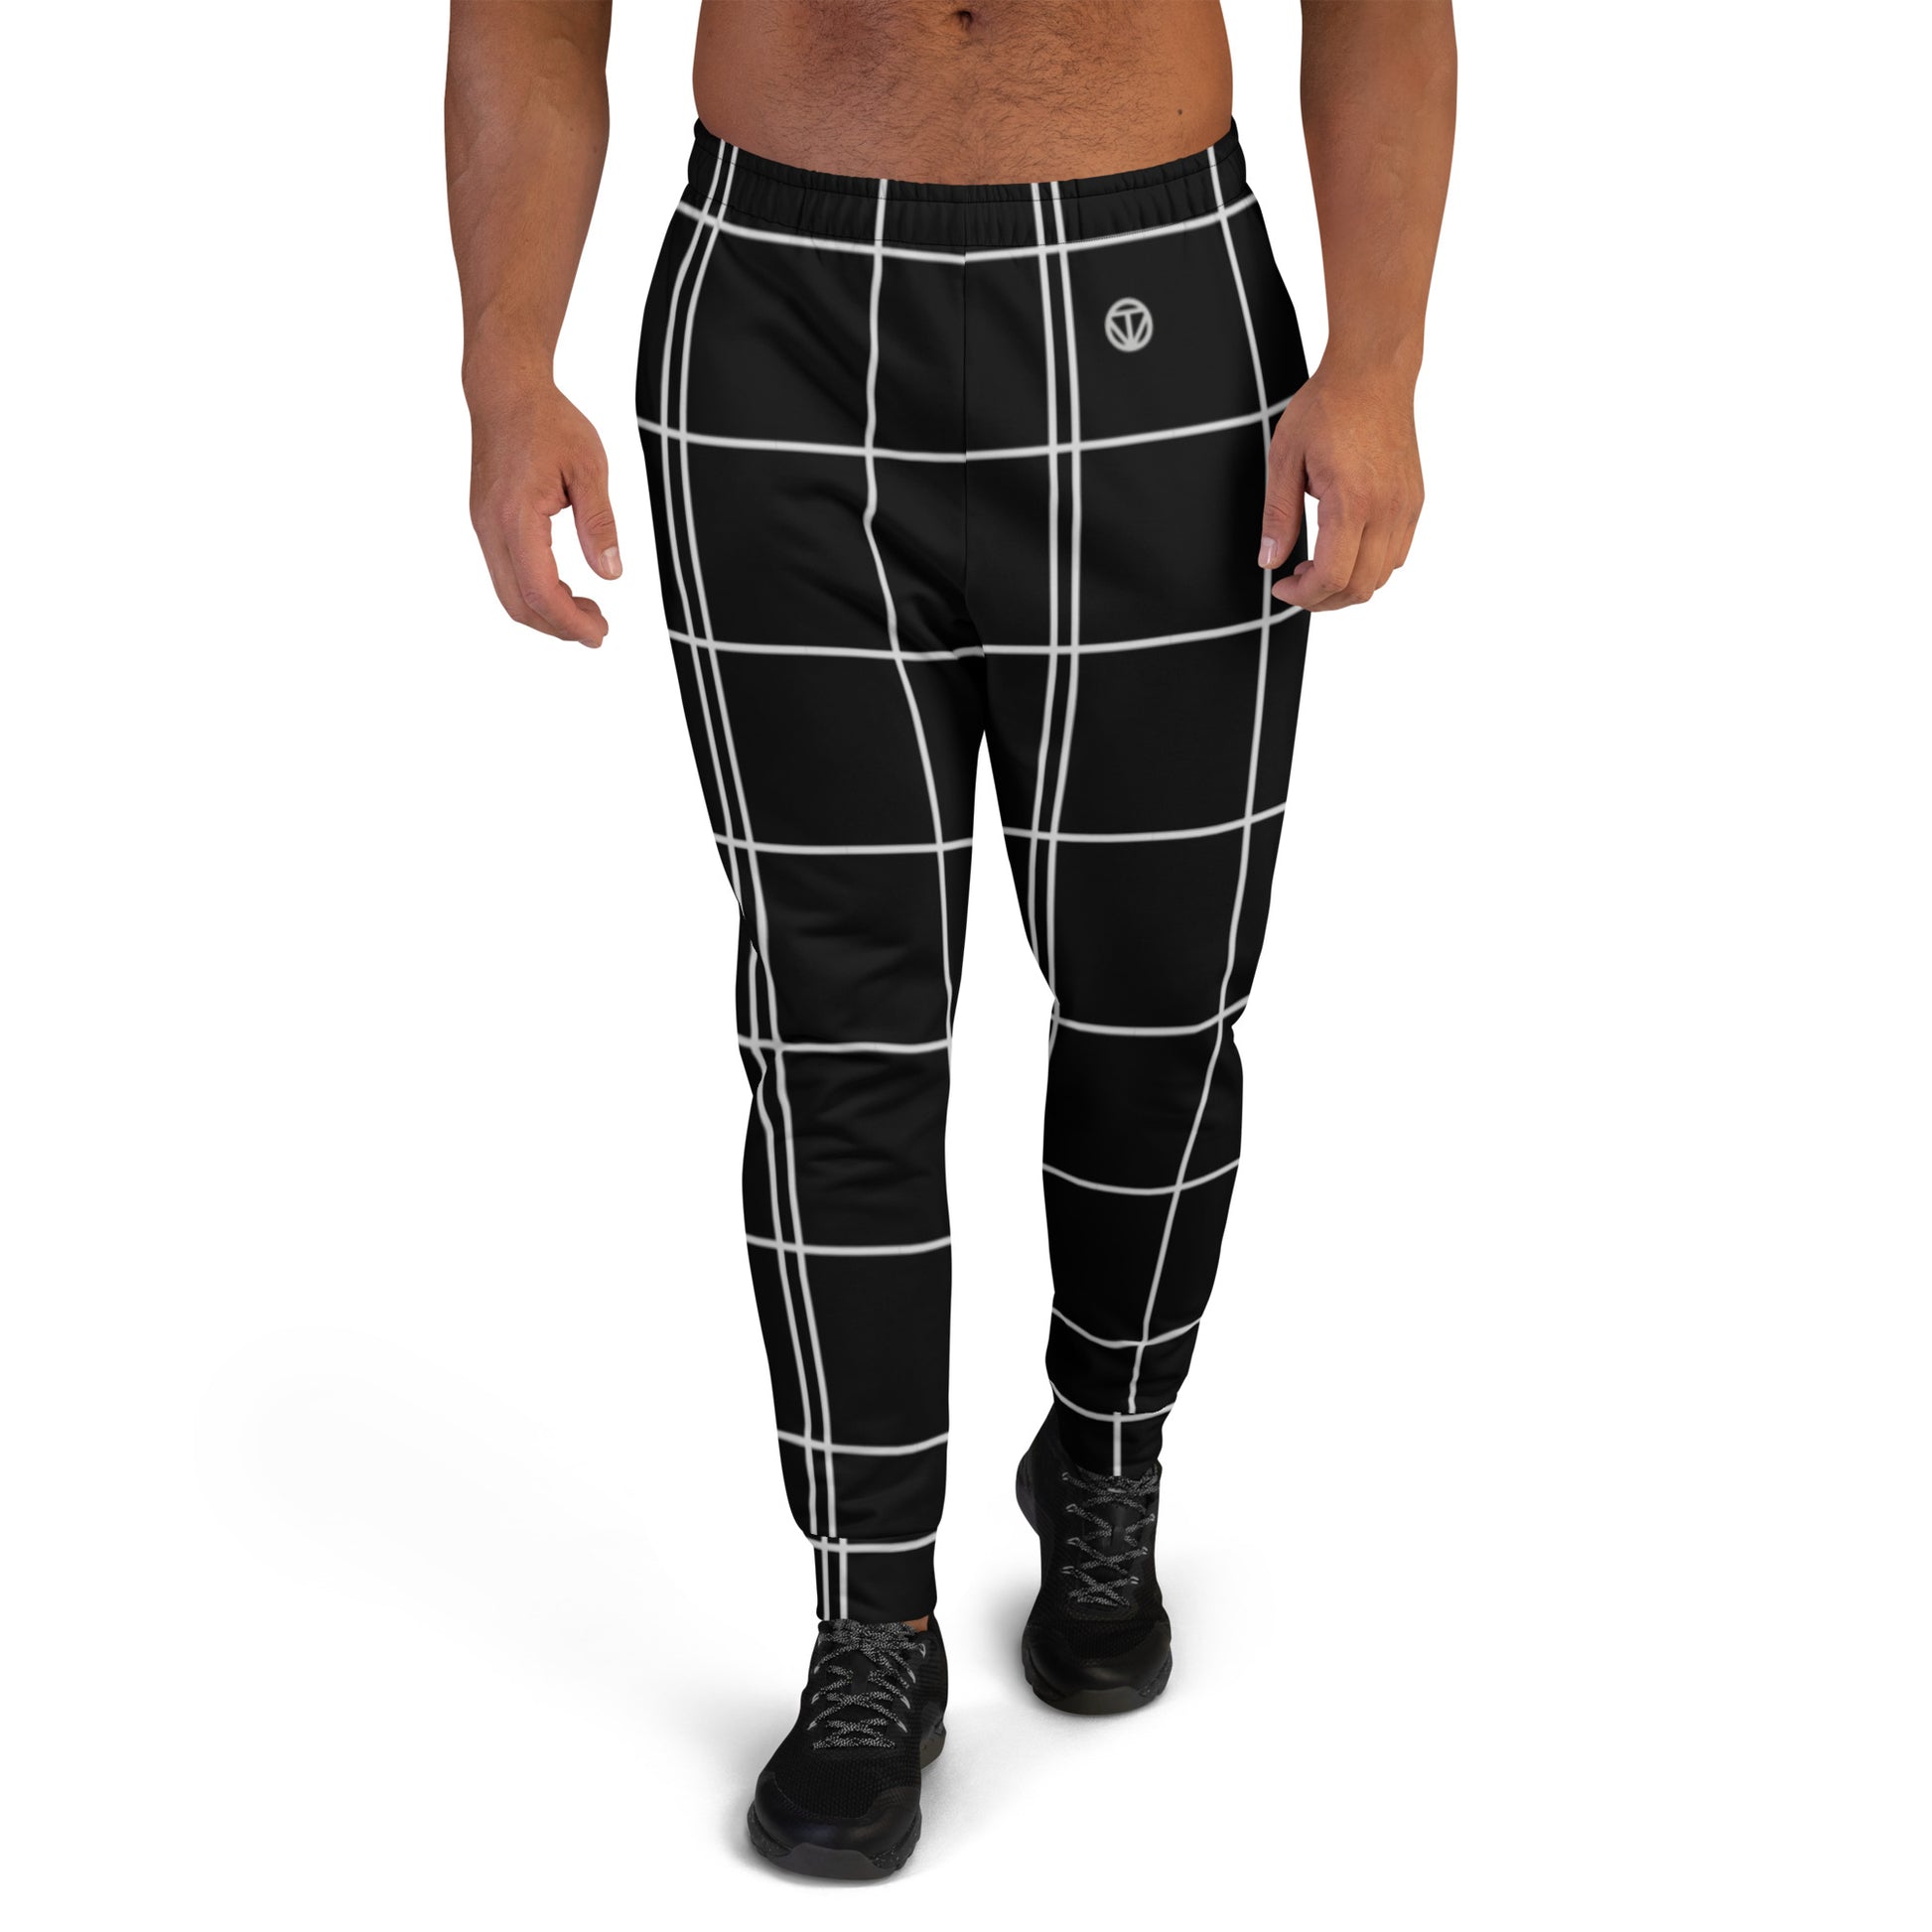 TIME OF VIBES - Men's Joggers LINEUP (Black) - €69.00